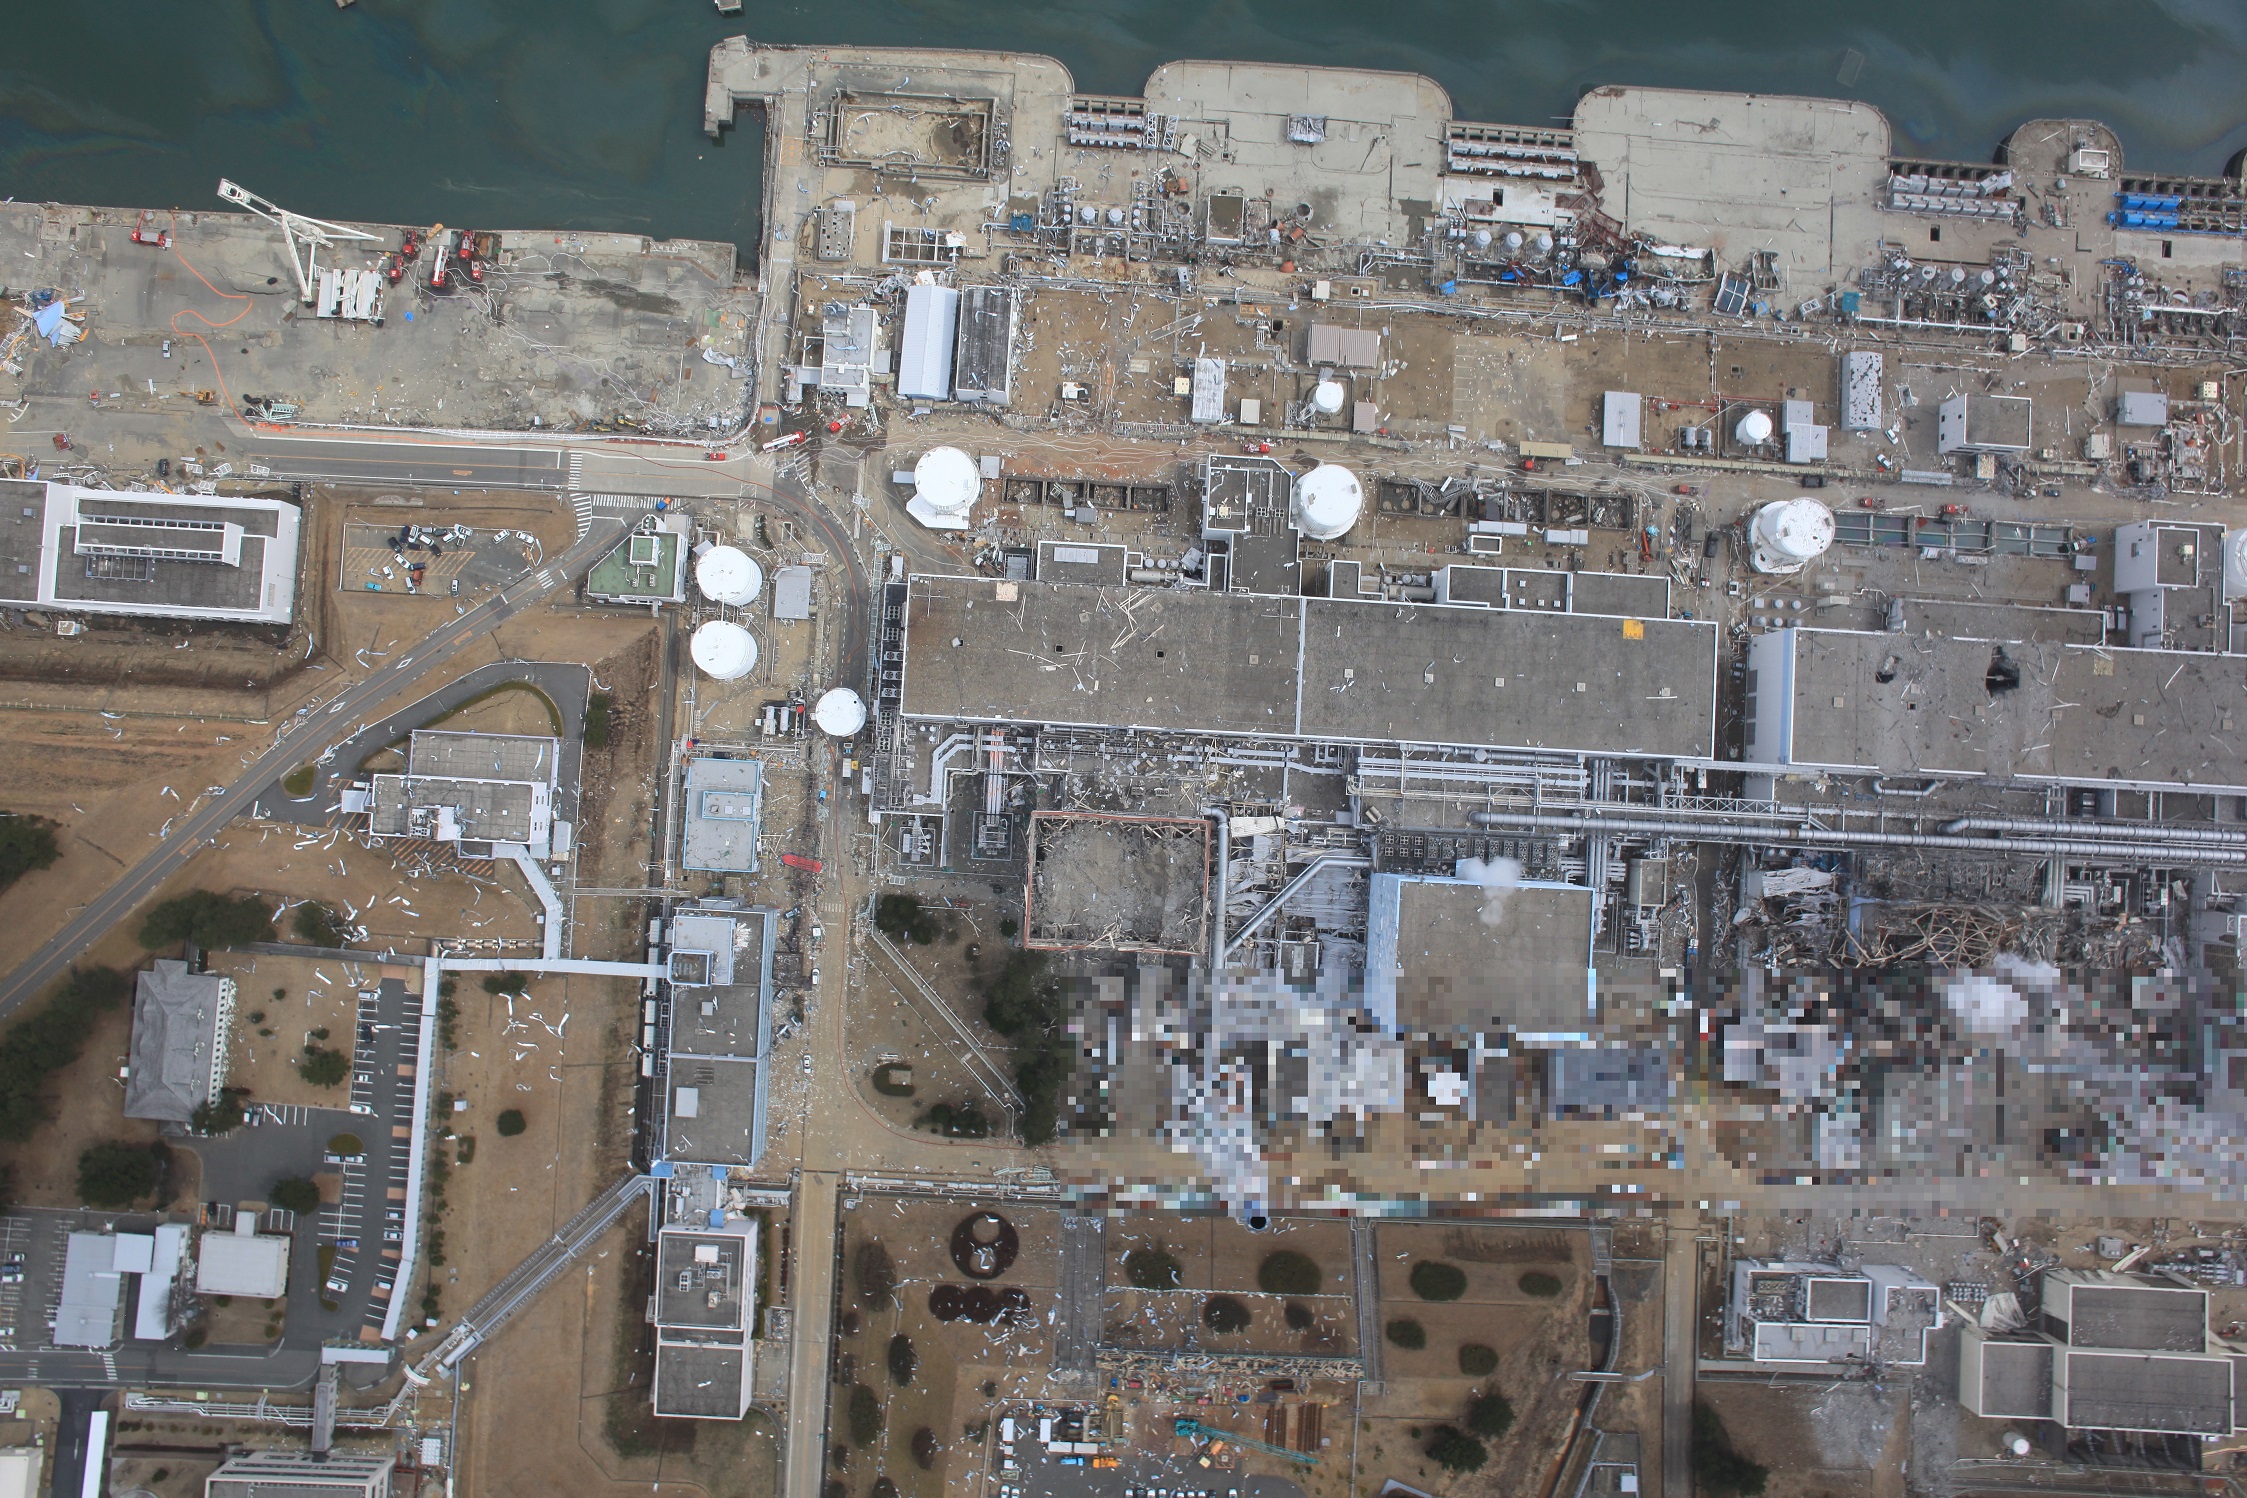 Status of the Fukushima Daiichi Nuclear Power Station accident